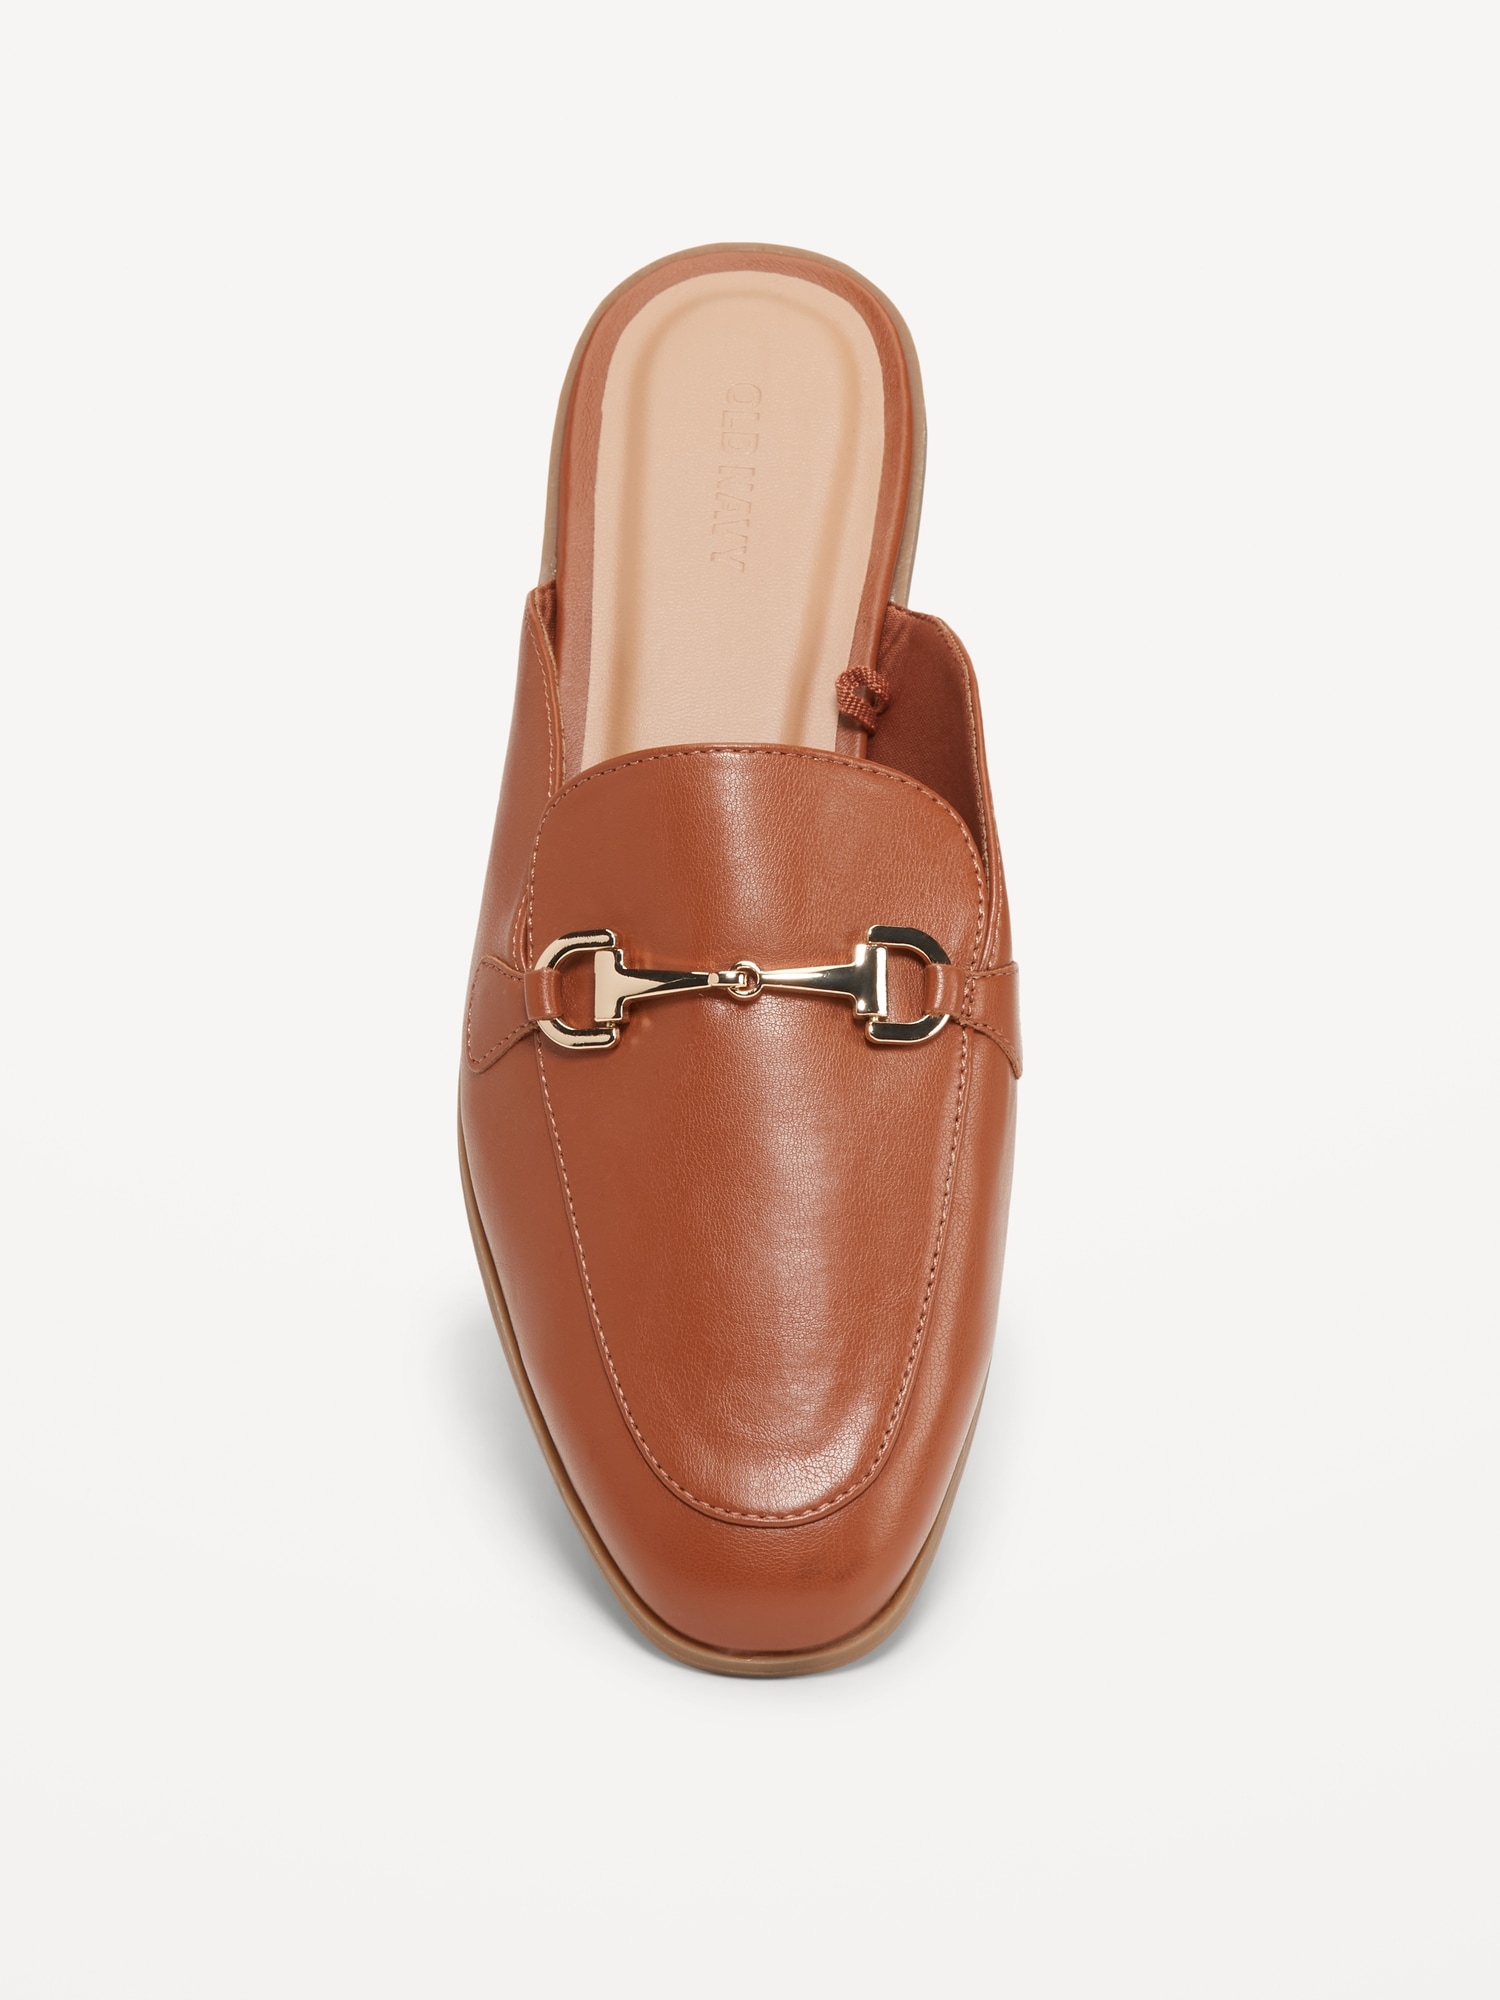 What are Mule Shoes?